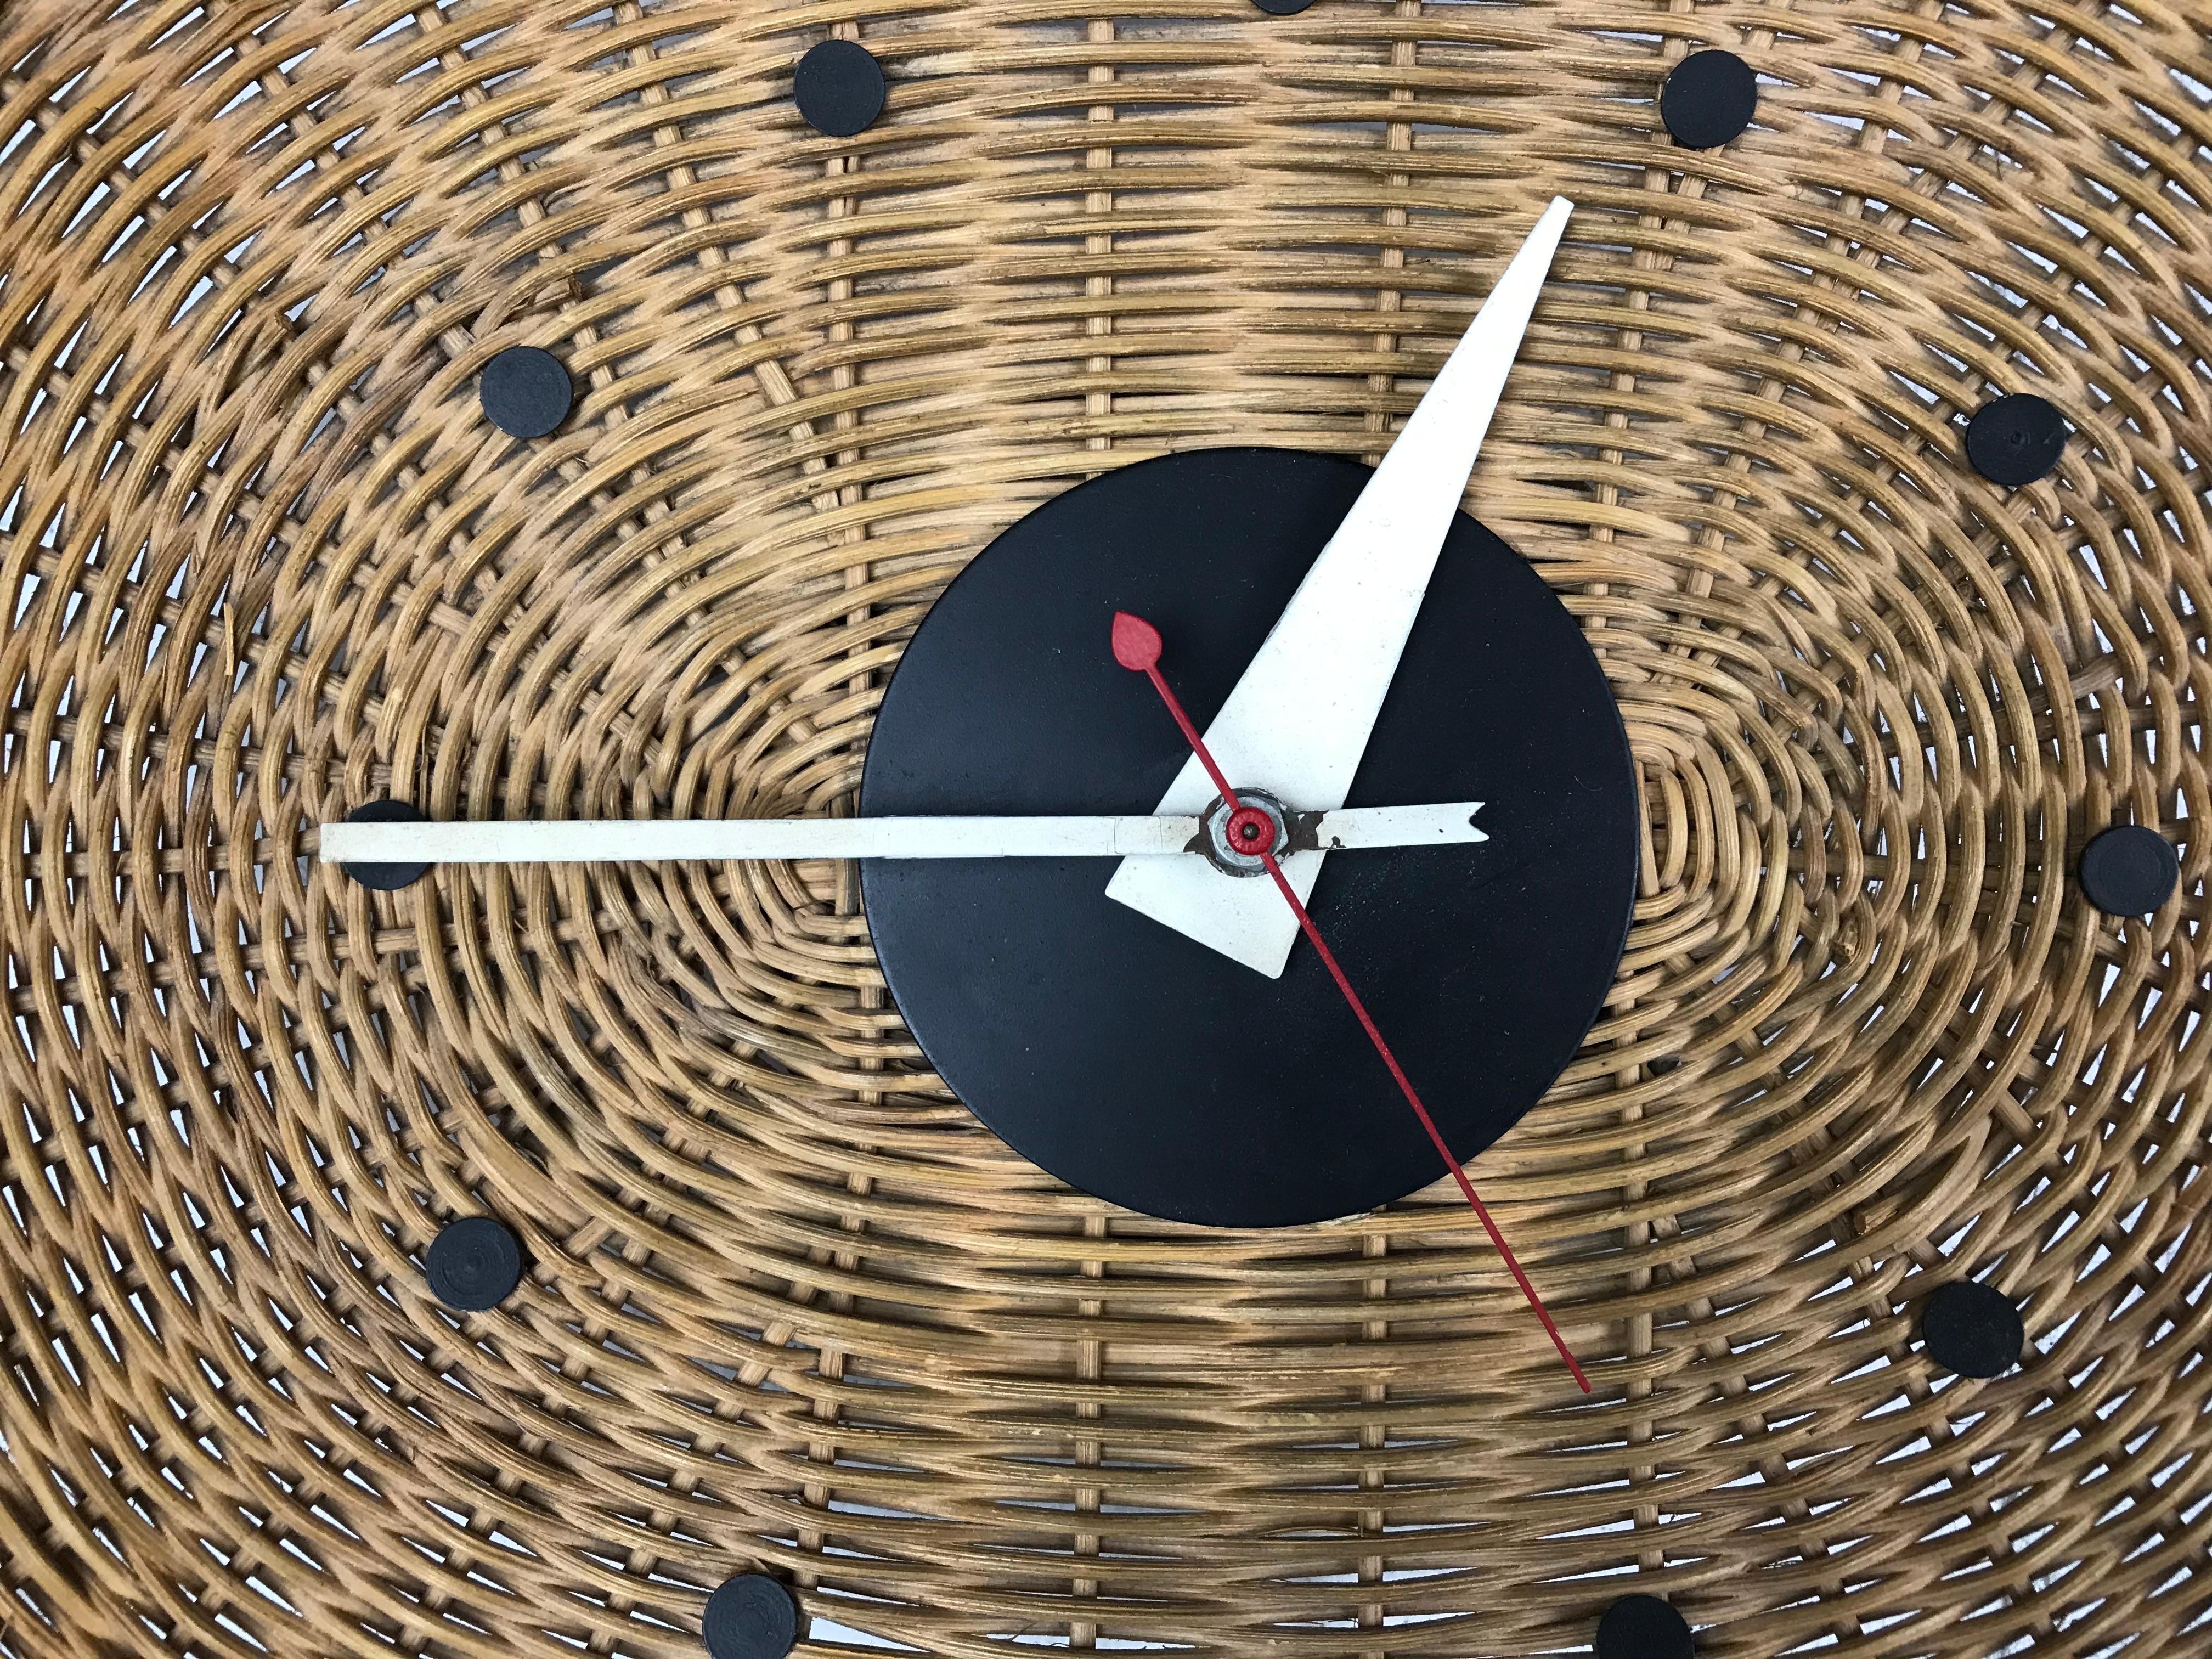 Modernist wicker 'basket' wall clock designed by George Nelson & Irving Harper for Howard Miller. Original condition - the clock does work. Label present.